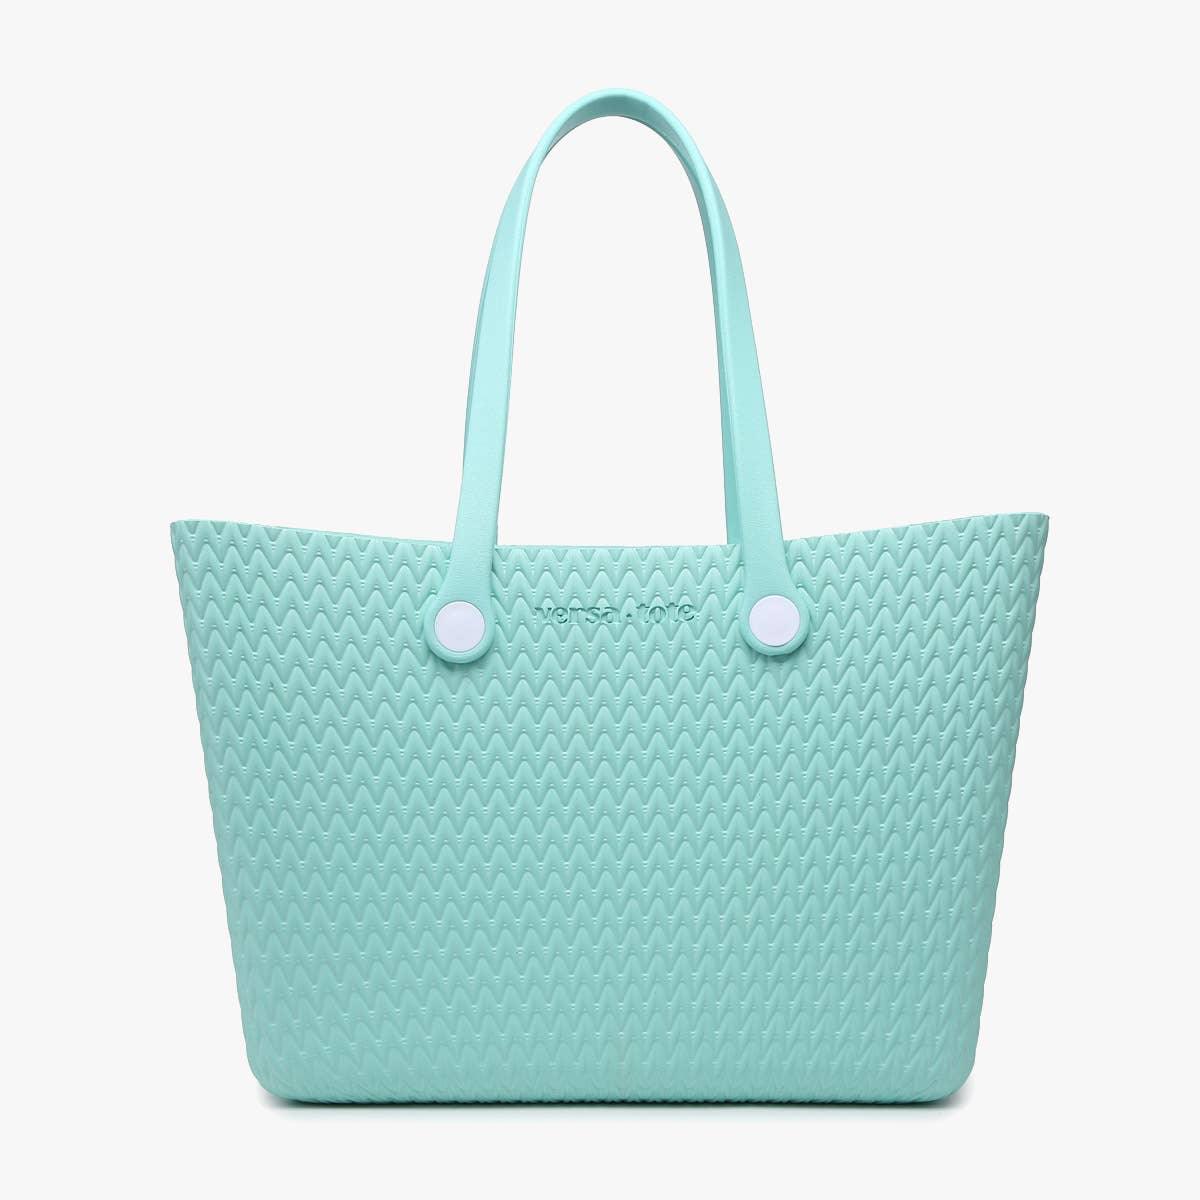 Carrie Textured Versa Tote w/ Straps - HERS